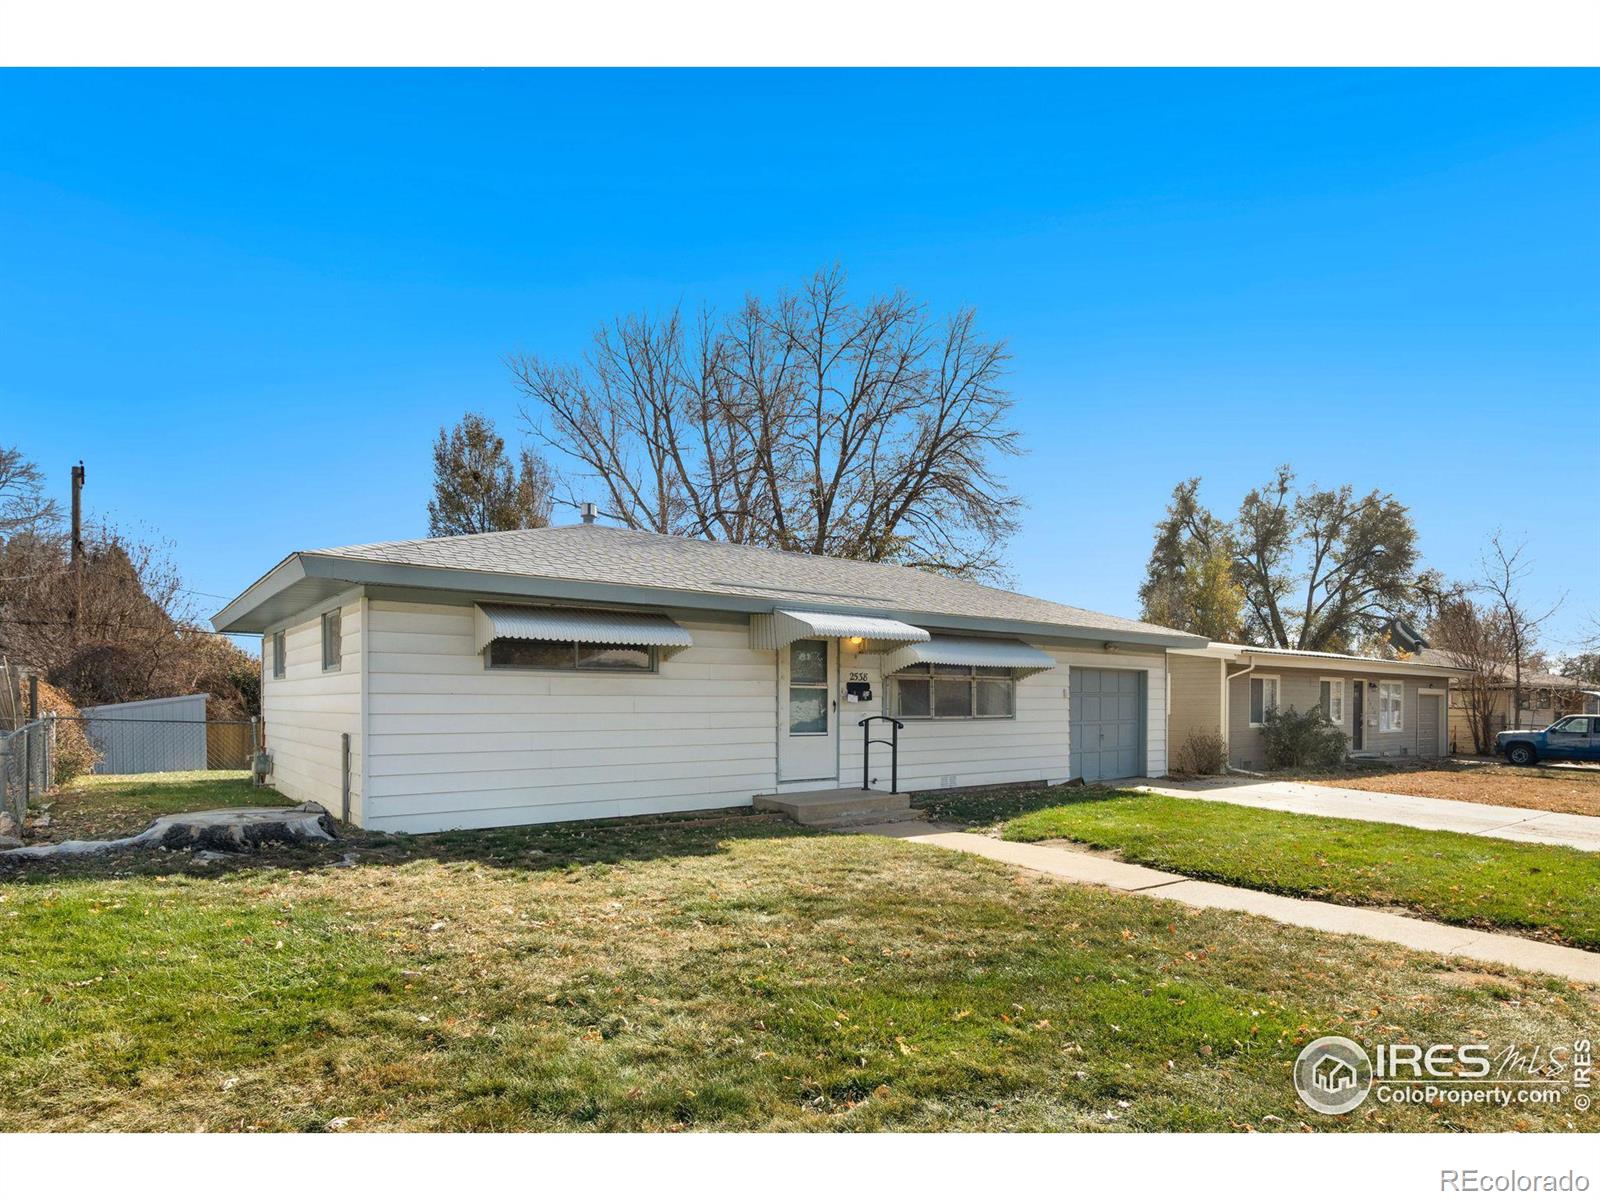 2538  16th Avenue, greeley MLS: 456789999609 Beds: 2 Baths: 1 Price: $318,500